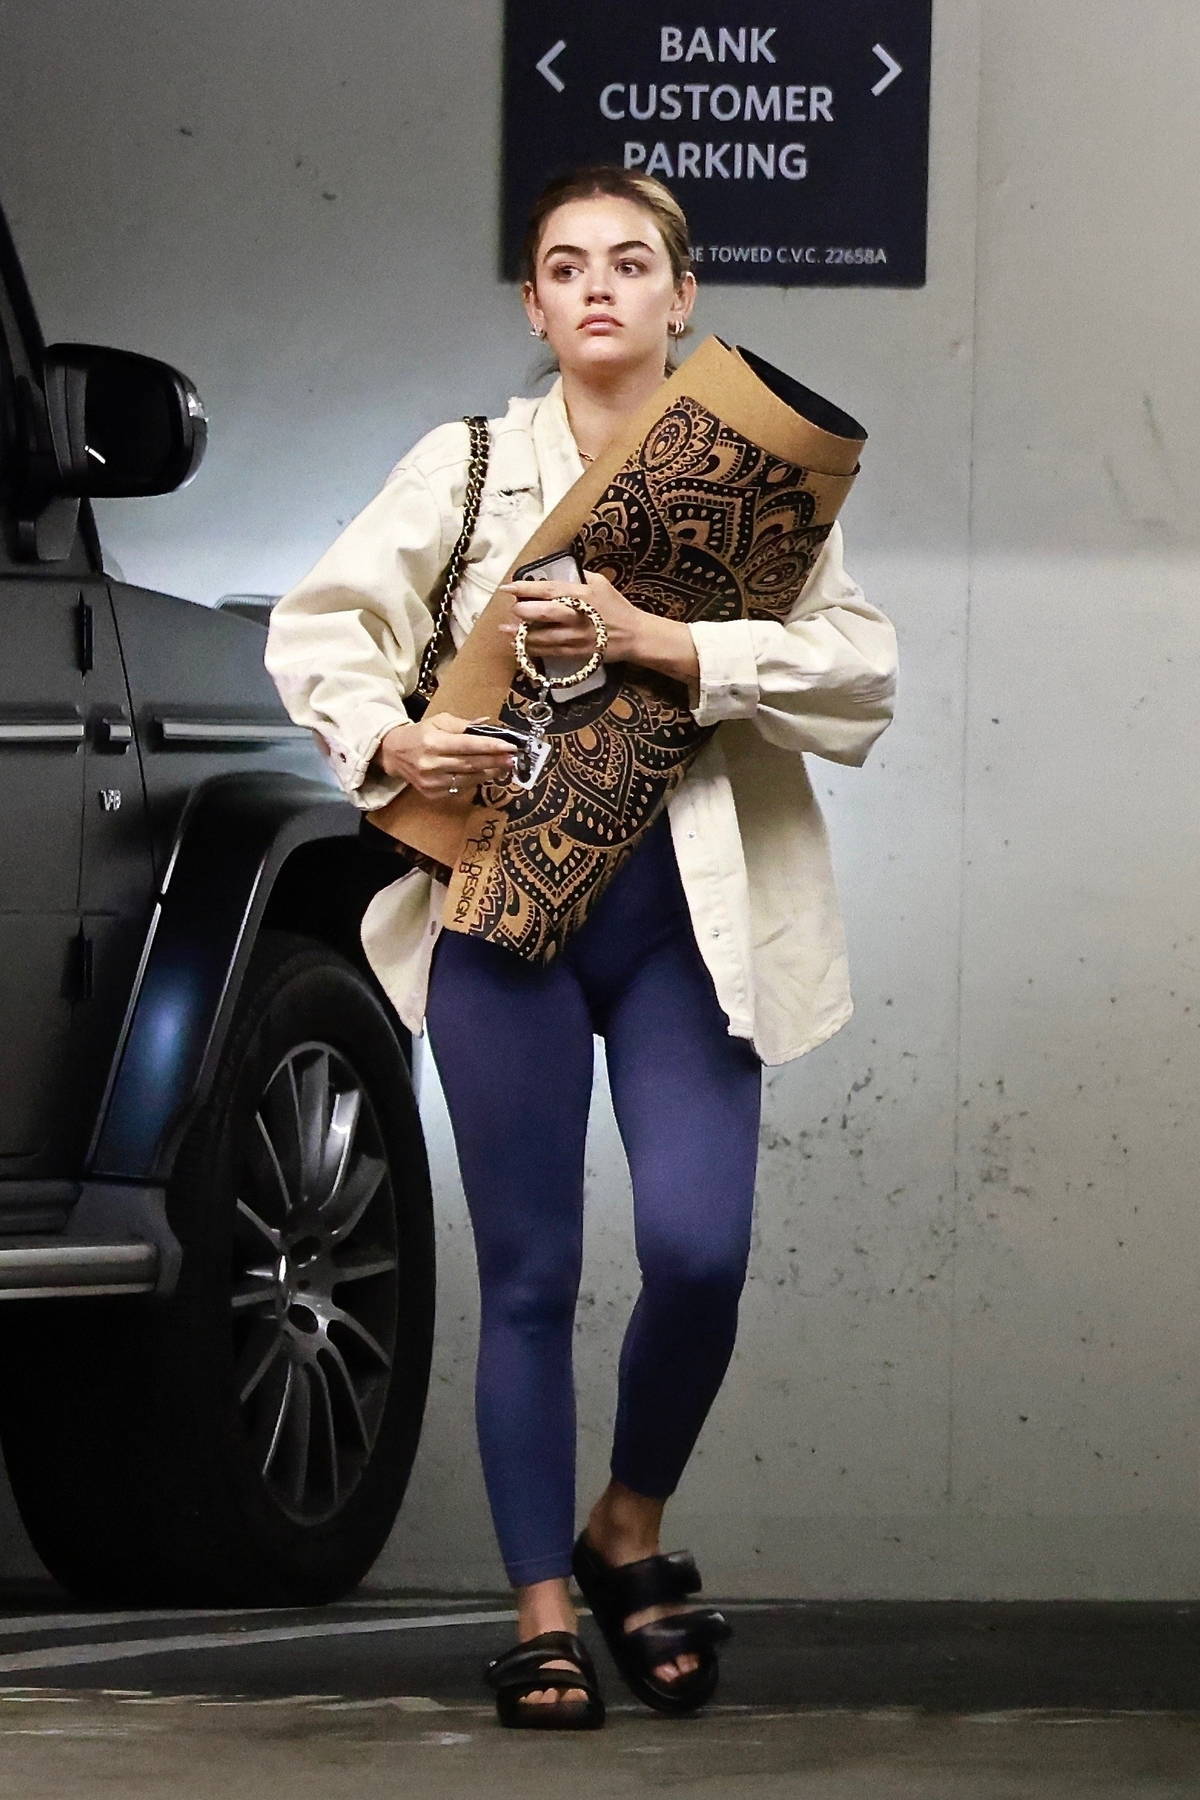 kate hudson sports an aviator nation hoodie and grey leggings while heading  for a workout in los angeles-010422_2